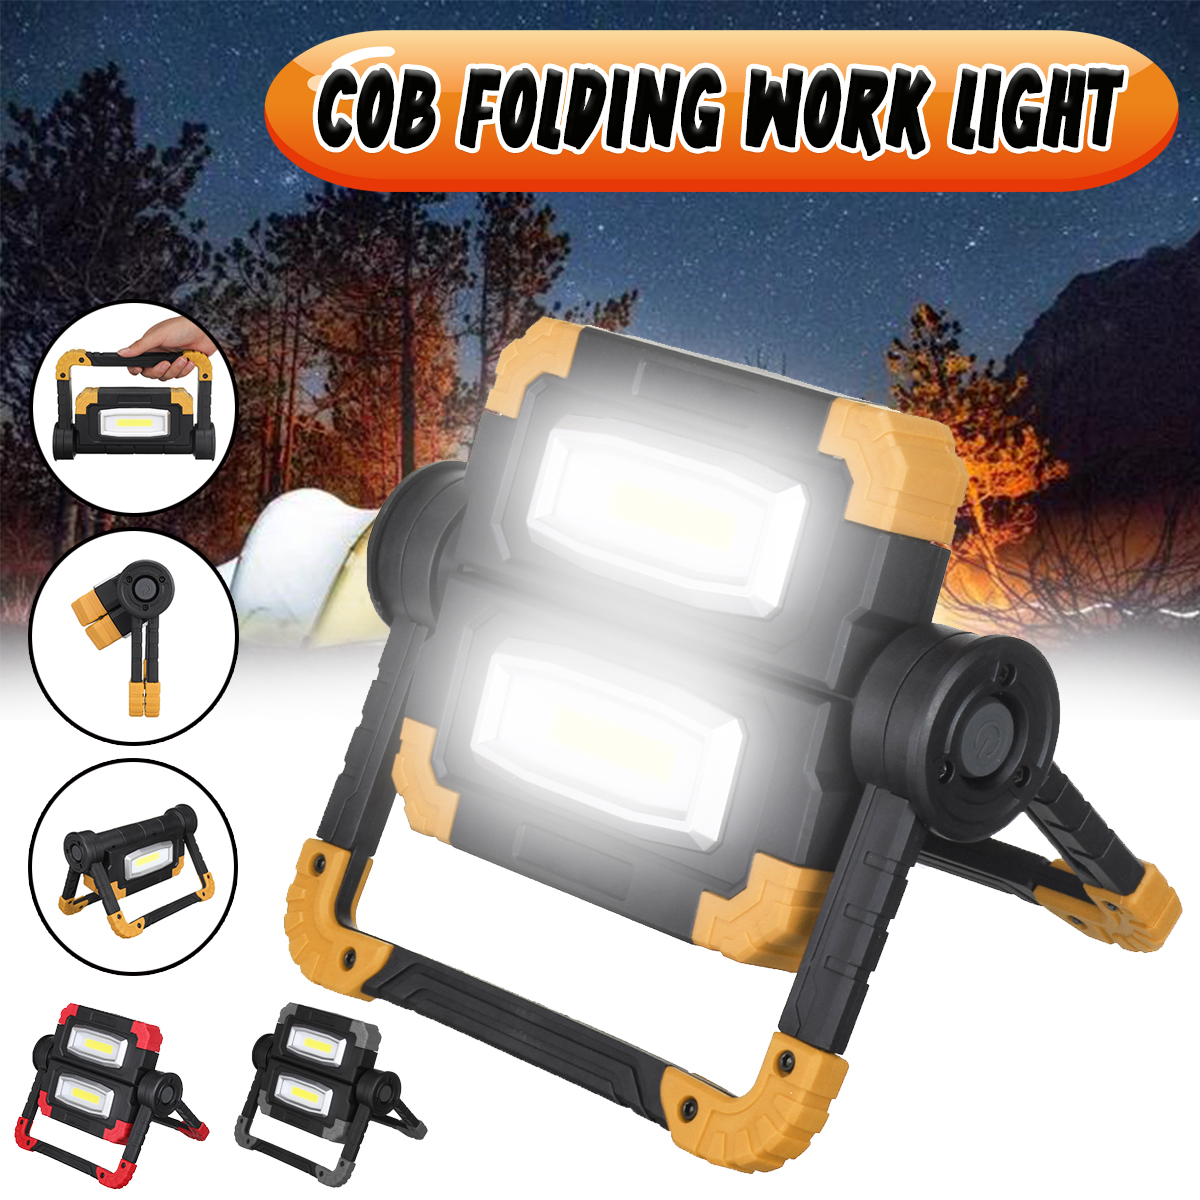 NEW-USB-Rechargeable-Outdoor-Portable-Work-Lamp-Searchlight-Double-Head-COB-Camping-Light-Anti-fall--1935148-1